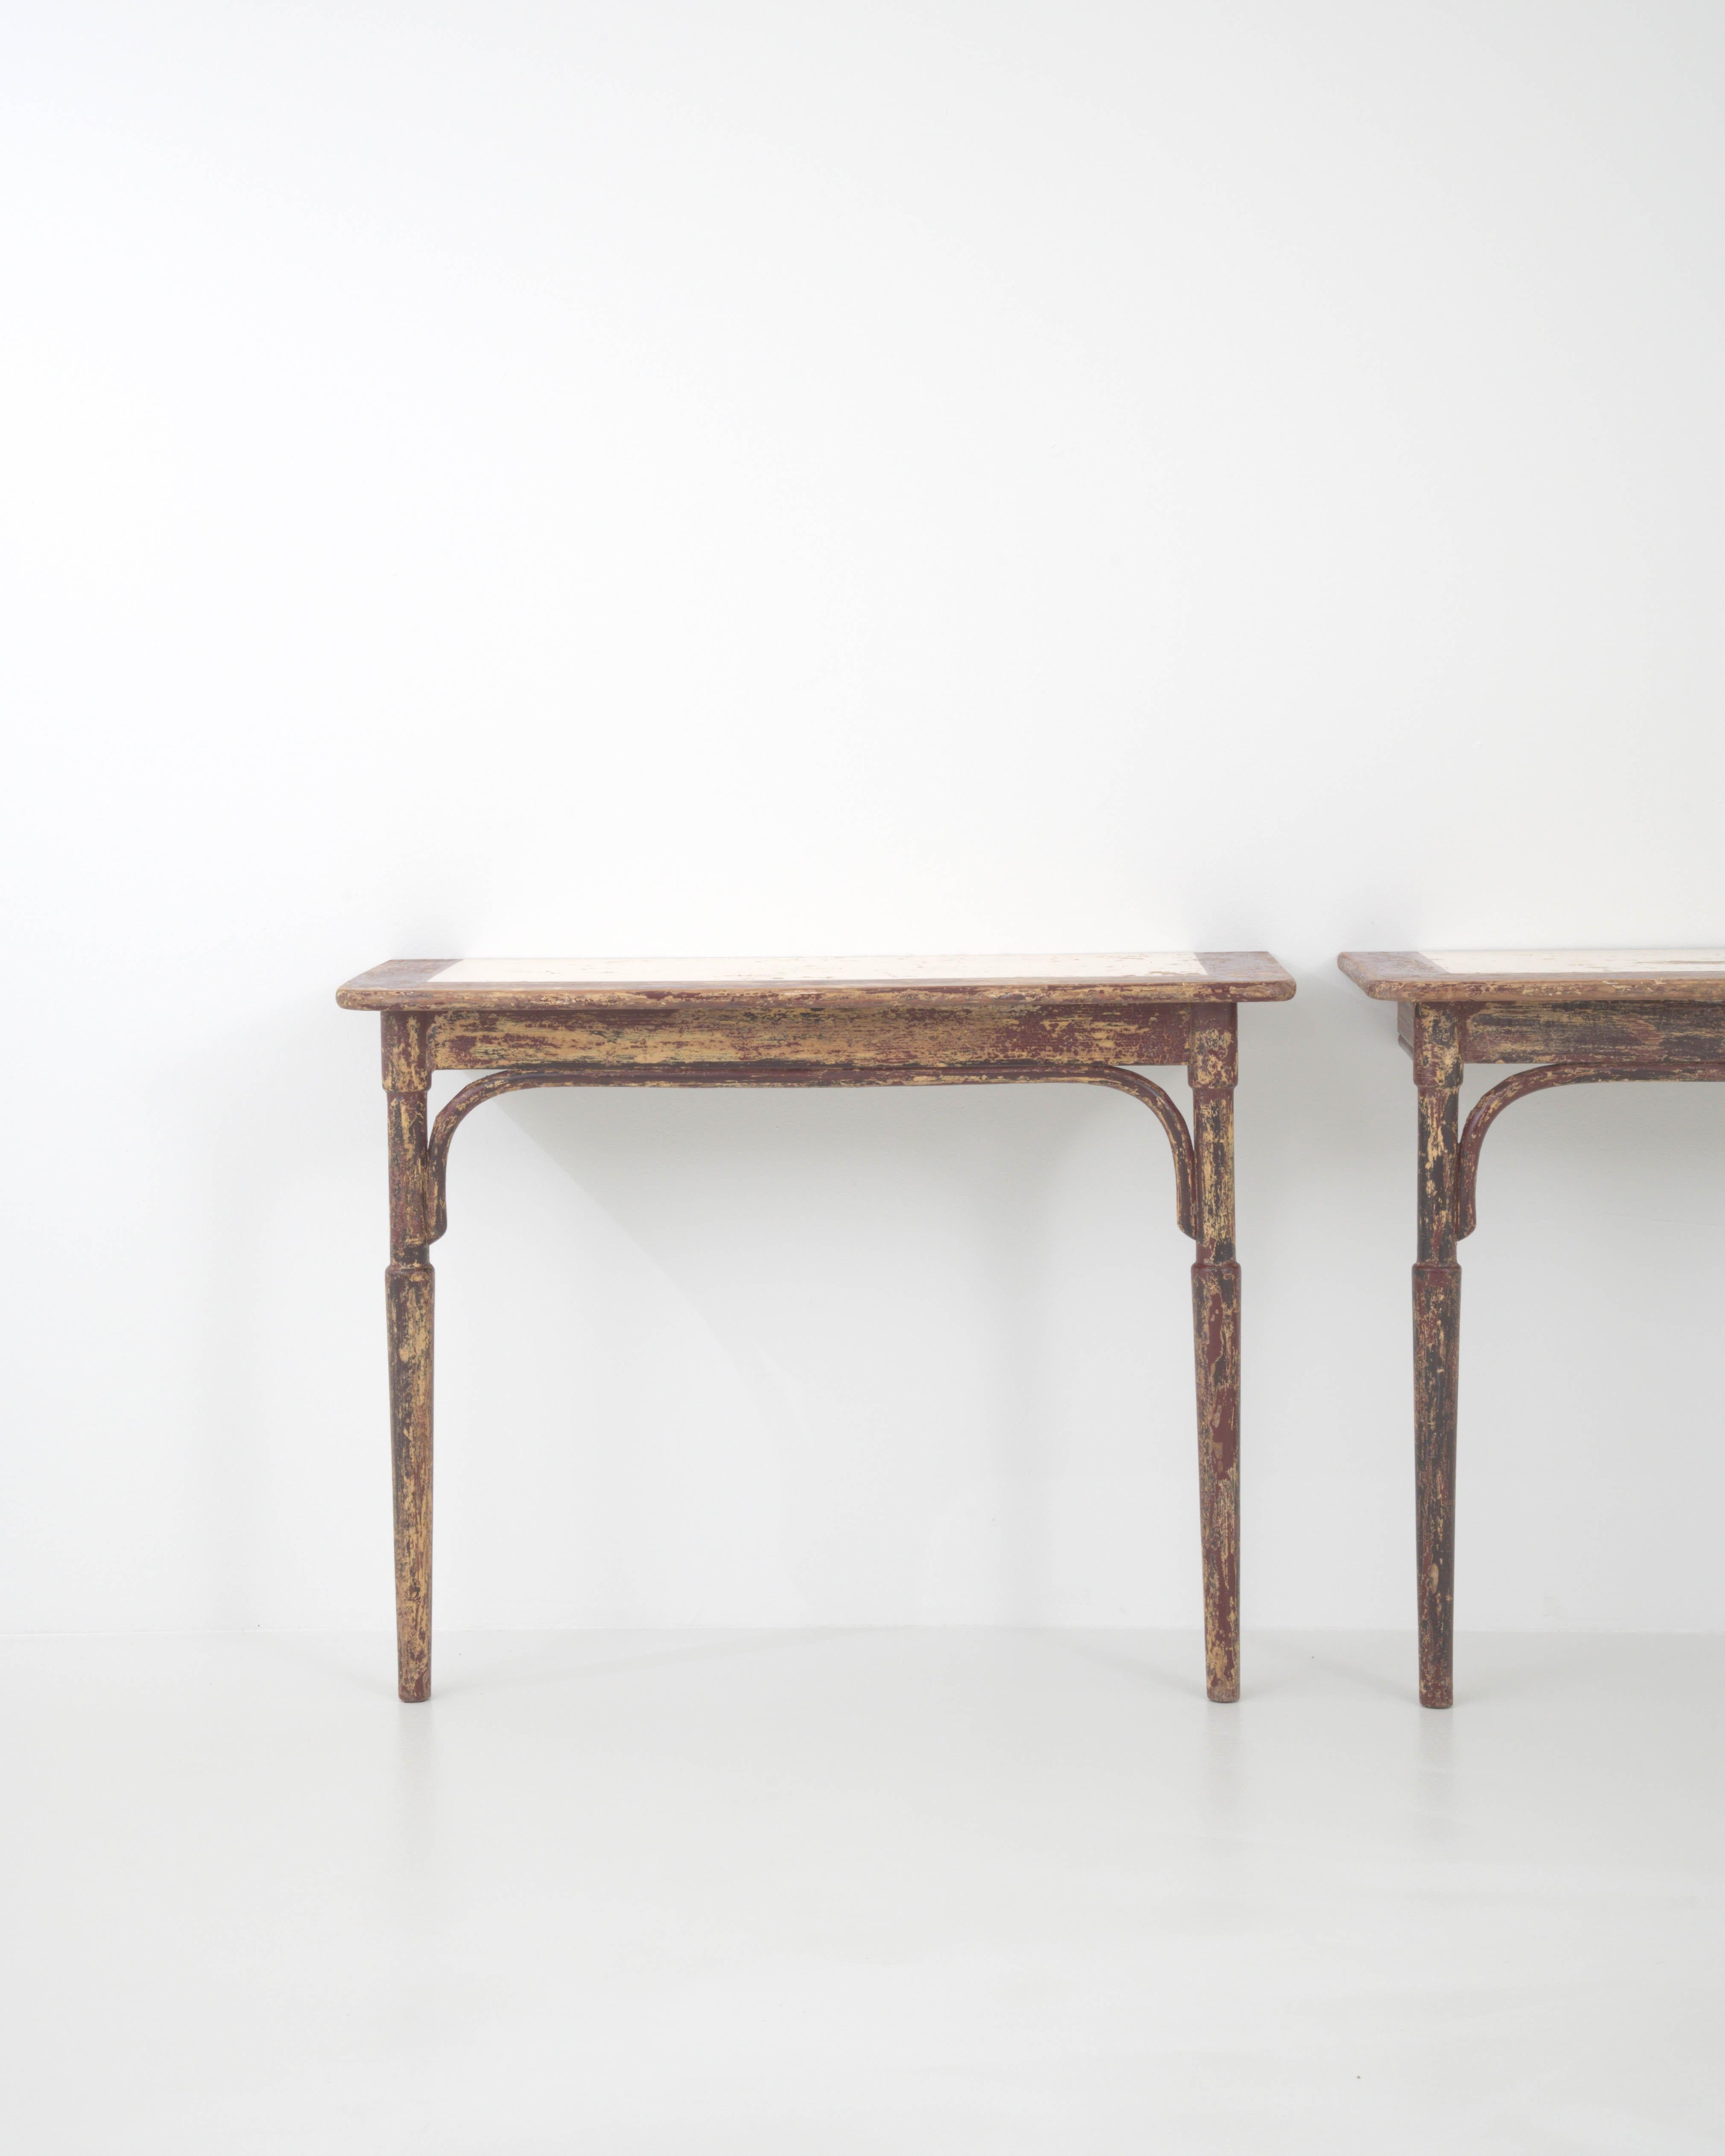 Early 20th Century French Wood Patinated Console Tables By Thonet, a Pair For Sale 3